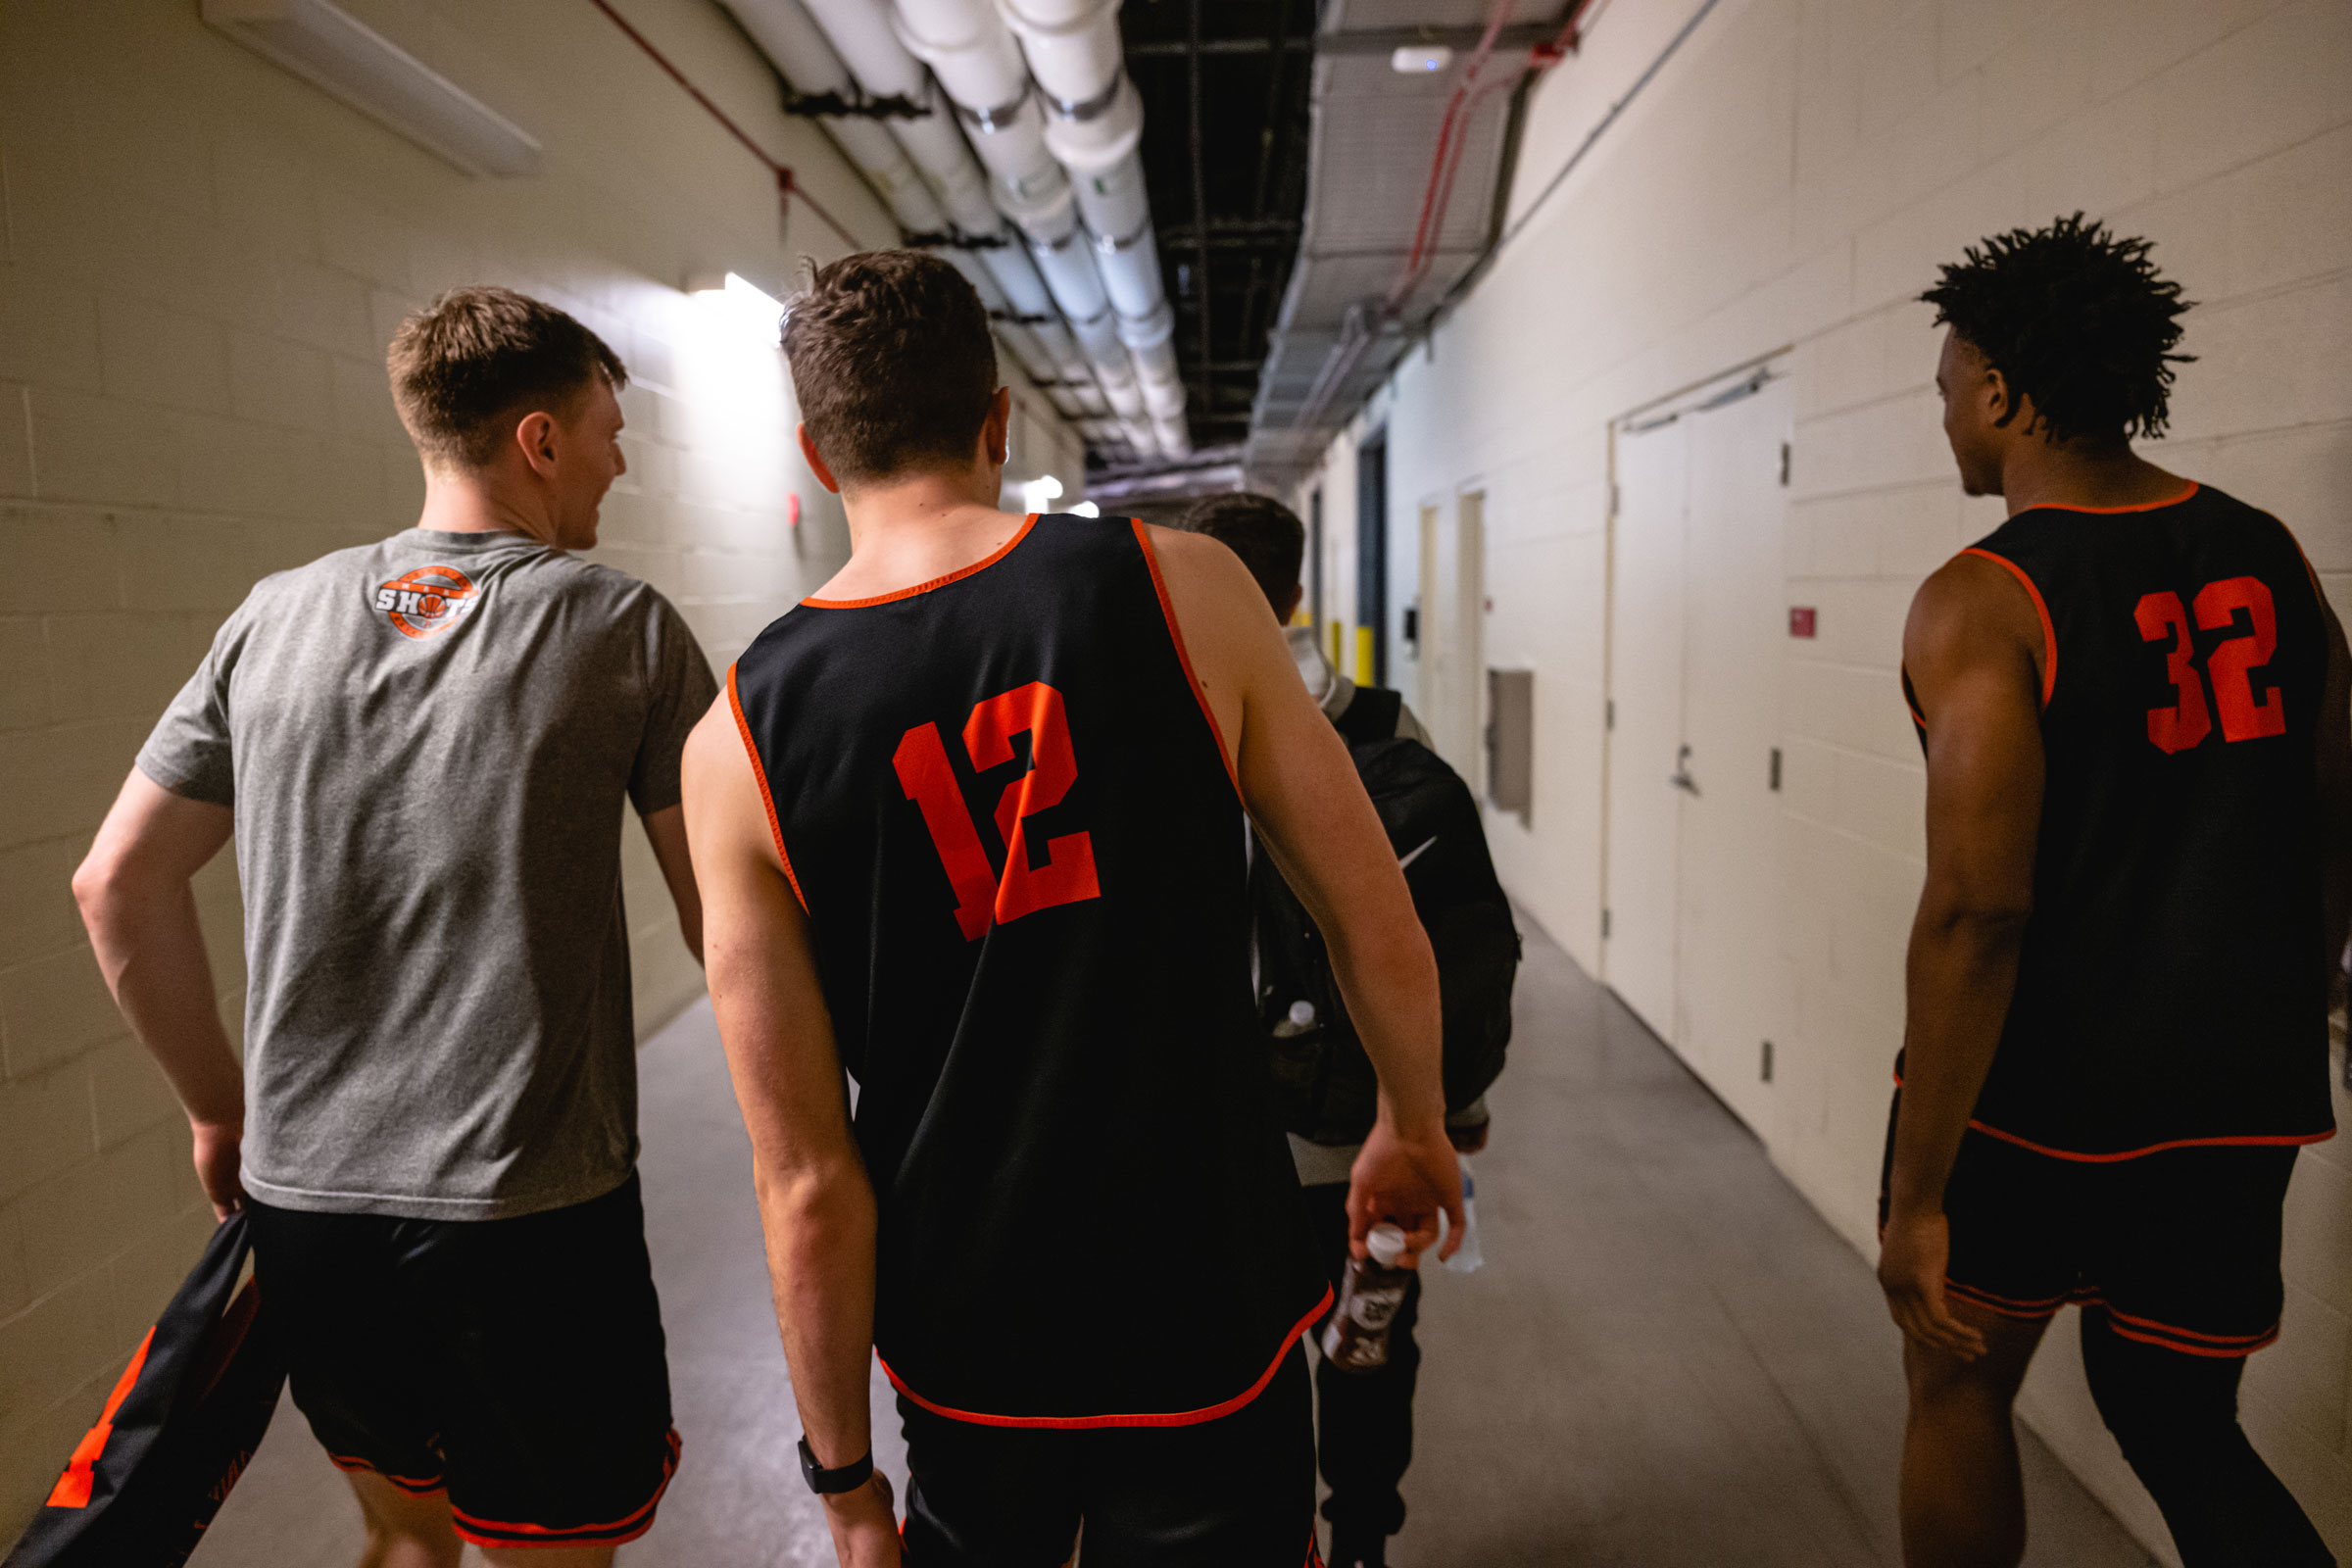 Blake Peters, Caden Pierce, and Keeshawn Kellman return to their locker room after a televised interview at the KFC YUM! Center in Louisville, Kentucky on March 23, 2023.